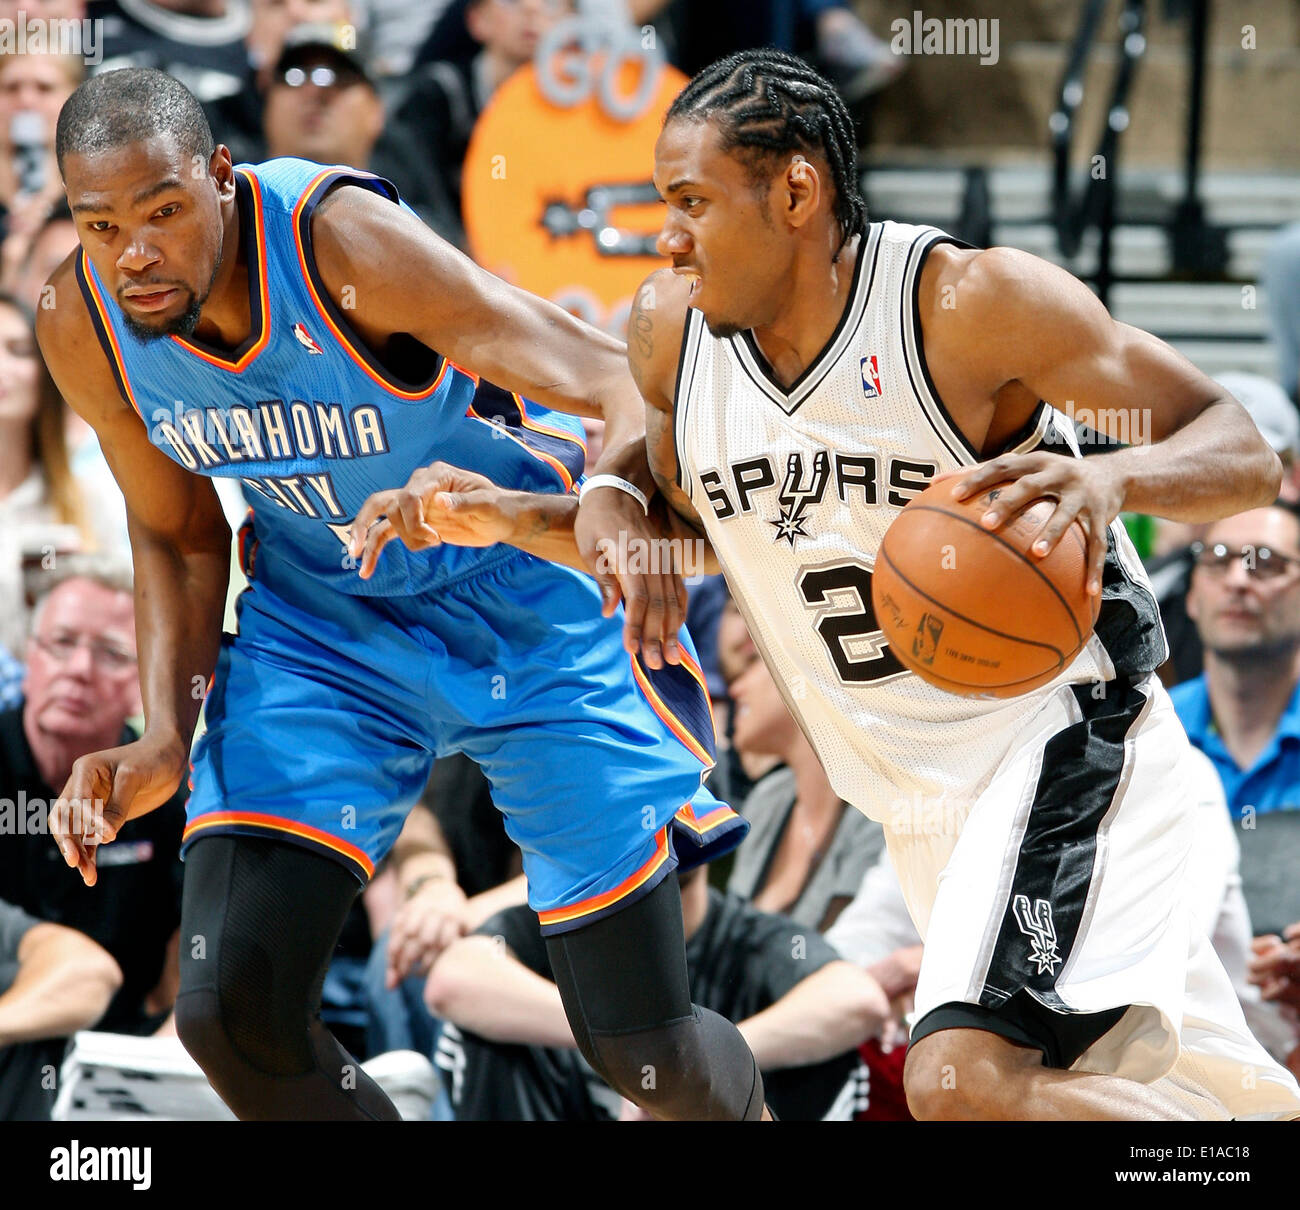 May 21, 2014 - San Antonio, TEXAS, USA - San Antonio Spurs' Kawhi Leonard looks for room around Oklahoma City Thunder's Kevin Durant during first half action of Game 2 in the Western Conference Finals Wednesday May 21, 2014 at the AT&T Center. (Credit Image: © San Antonio Express-News/ZUMAPRESS.com) Stock Photo